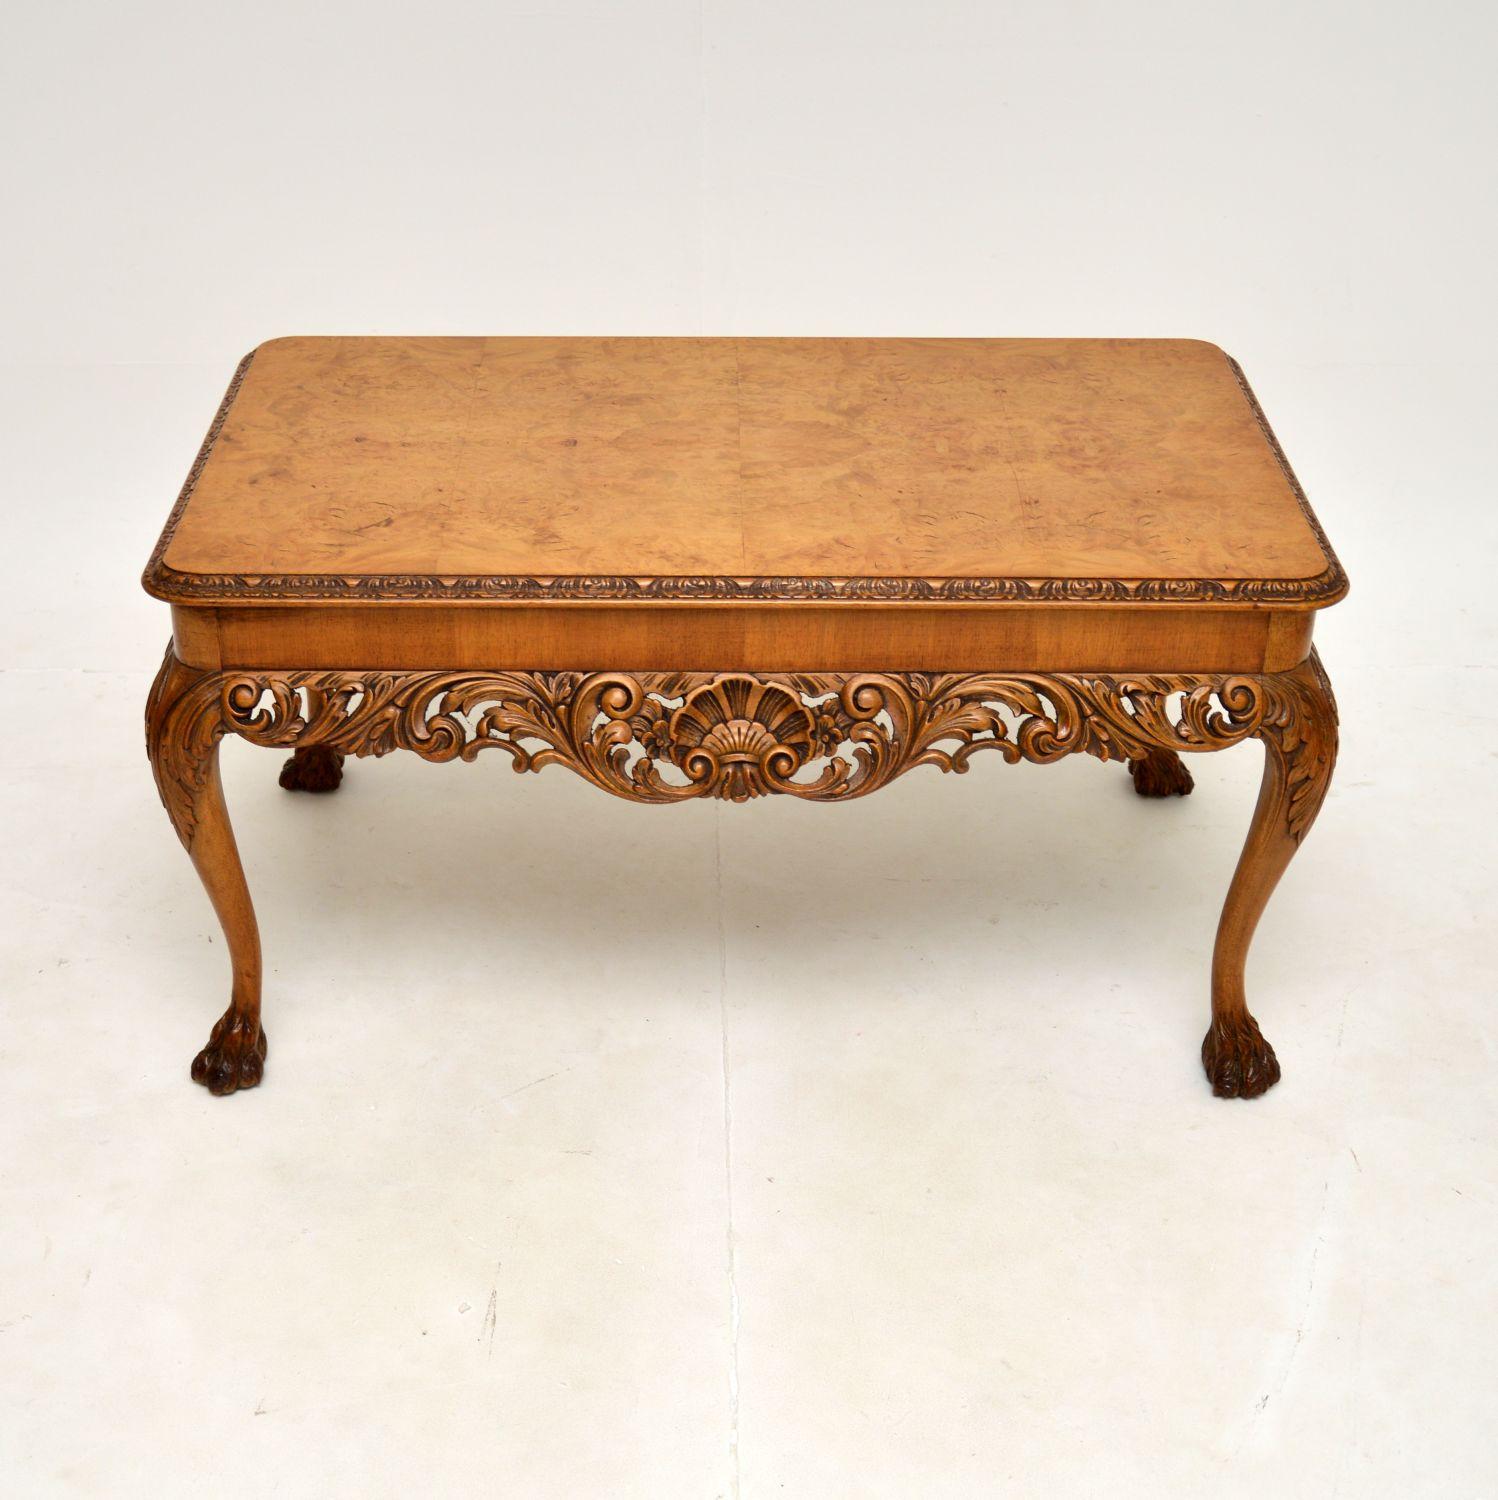 A beautiful and extremely well made antique burr walnut Queen Anne style coffee table. This was made in England, it dates from around the 1920’s.

The quality is exceptional, this has stunning burr walnut grain patterns and a gorgeous colour tone.